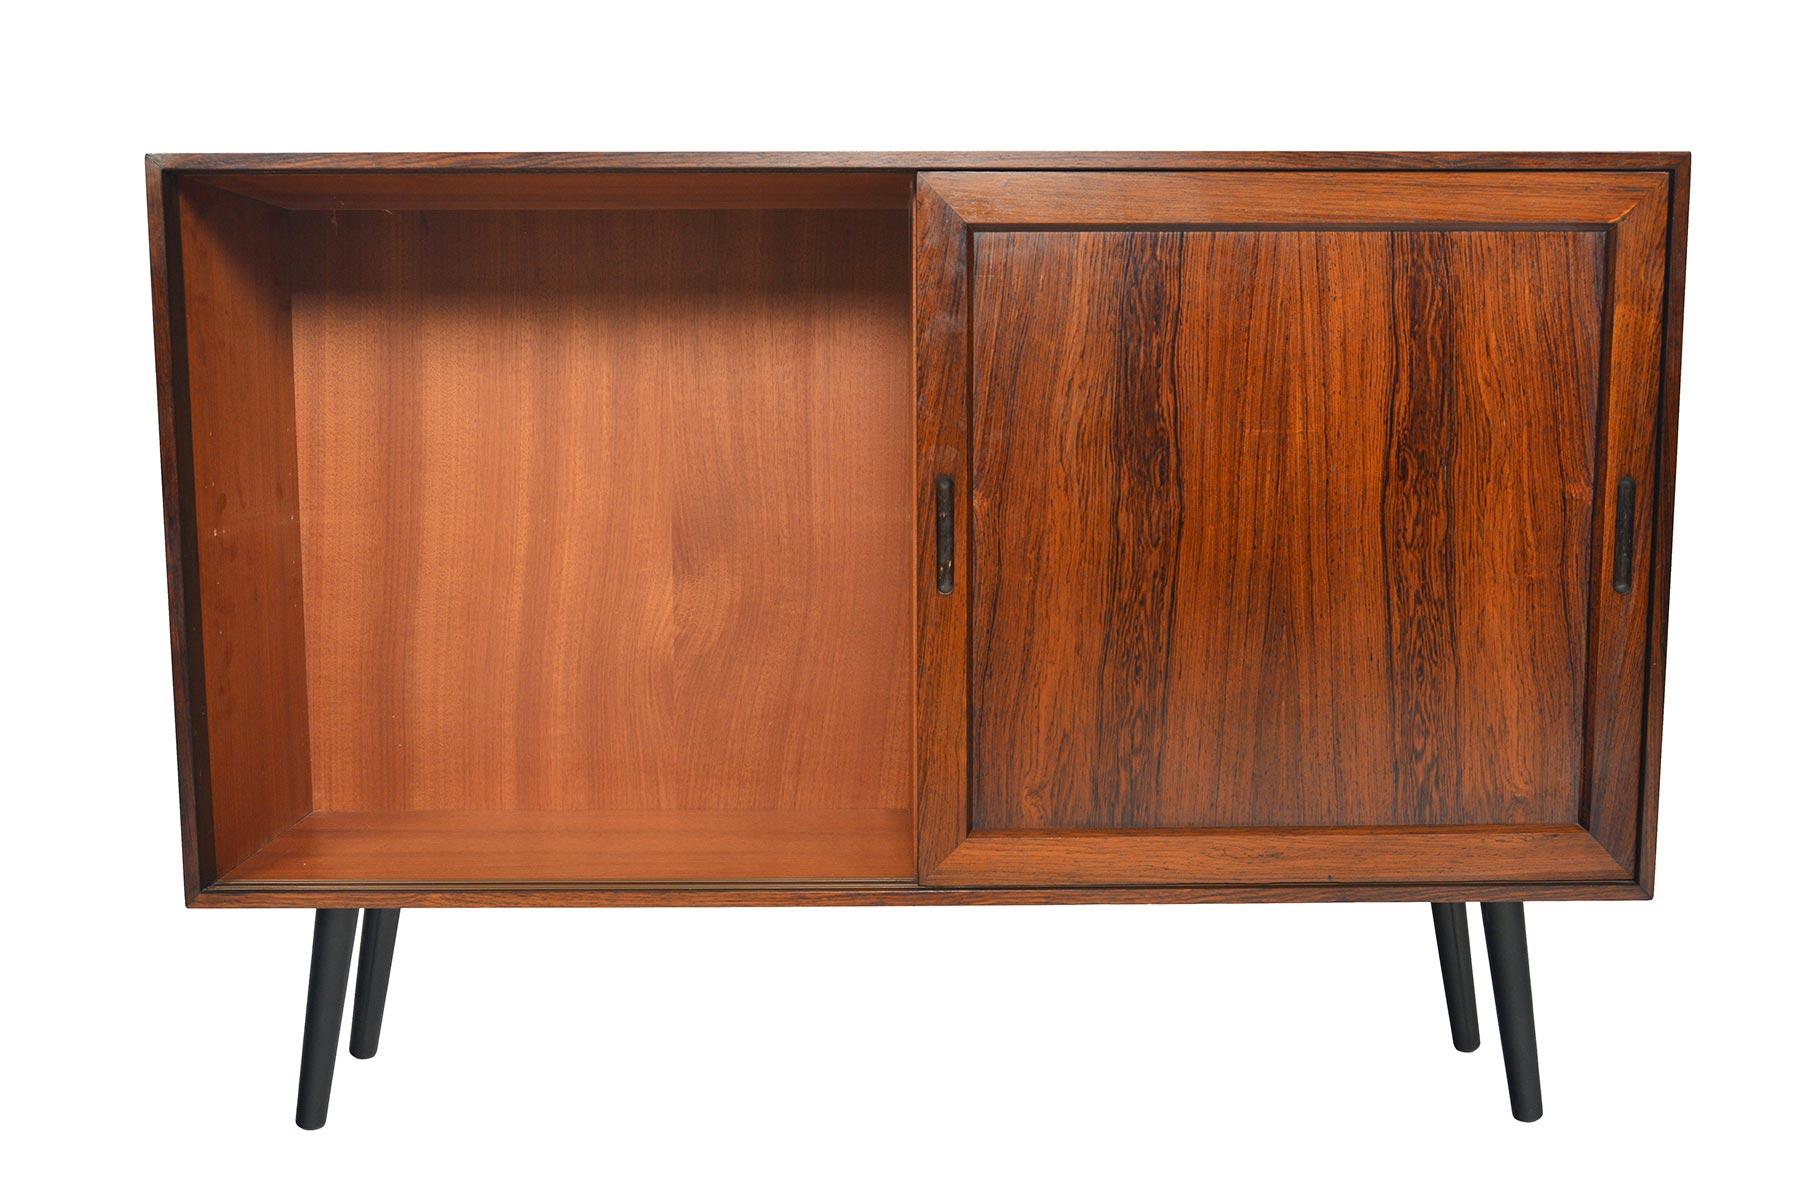 This small Danish modern rosewood credenza with doors is a perfect storage solution for any modern home. This piece features a narrow profile with two bays and adjustable shelving for each side. Piece stands on canted spindle legs. In excellent